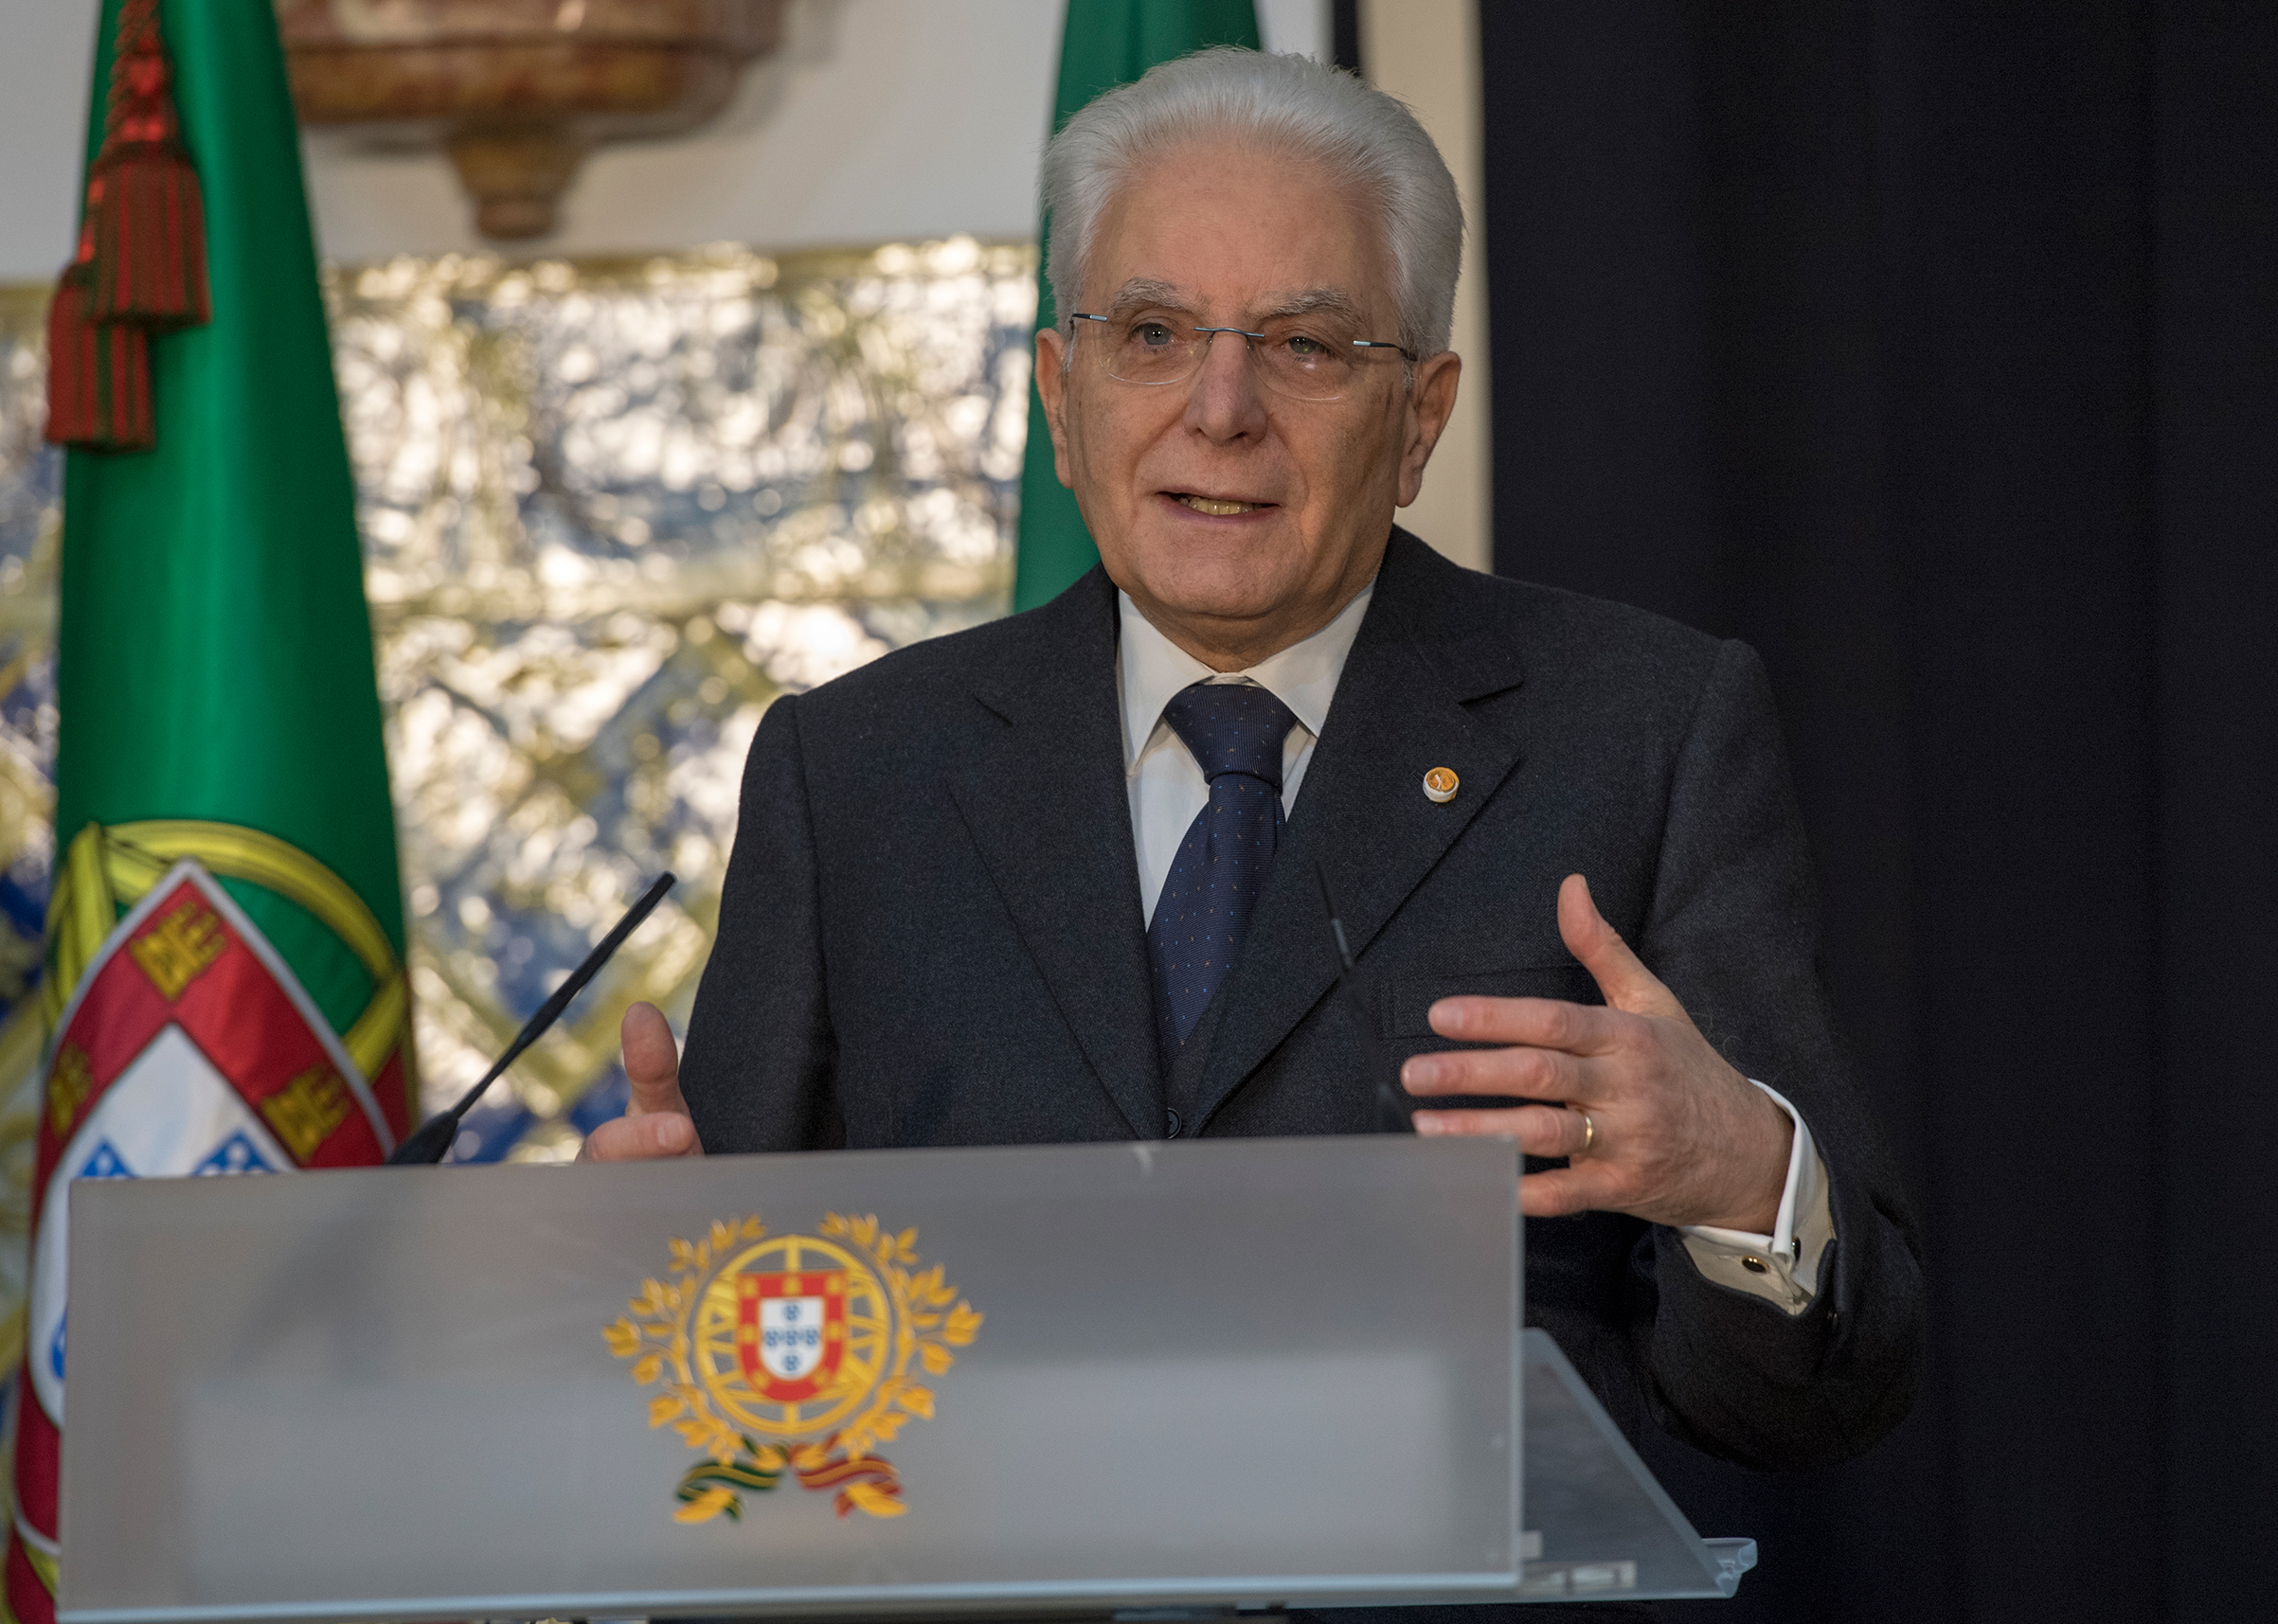 Italian President Sergio Mattarella delivers remarks at the end of his meeting with Portuguese President in Belem Presidential Palace on Dec. 06, 2017 in Lisbon, Portugal. (Horacio Villalobos - Corbis/Getty Images)